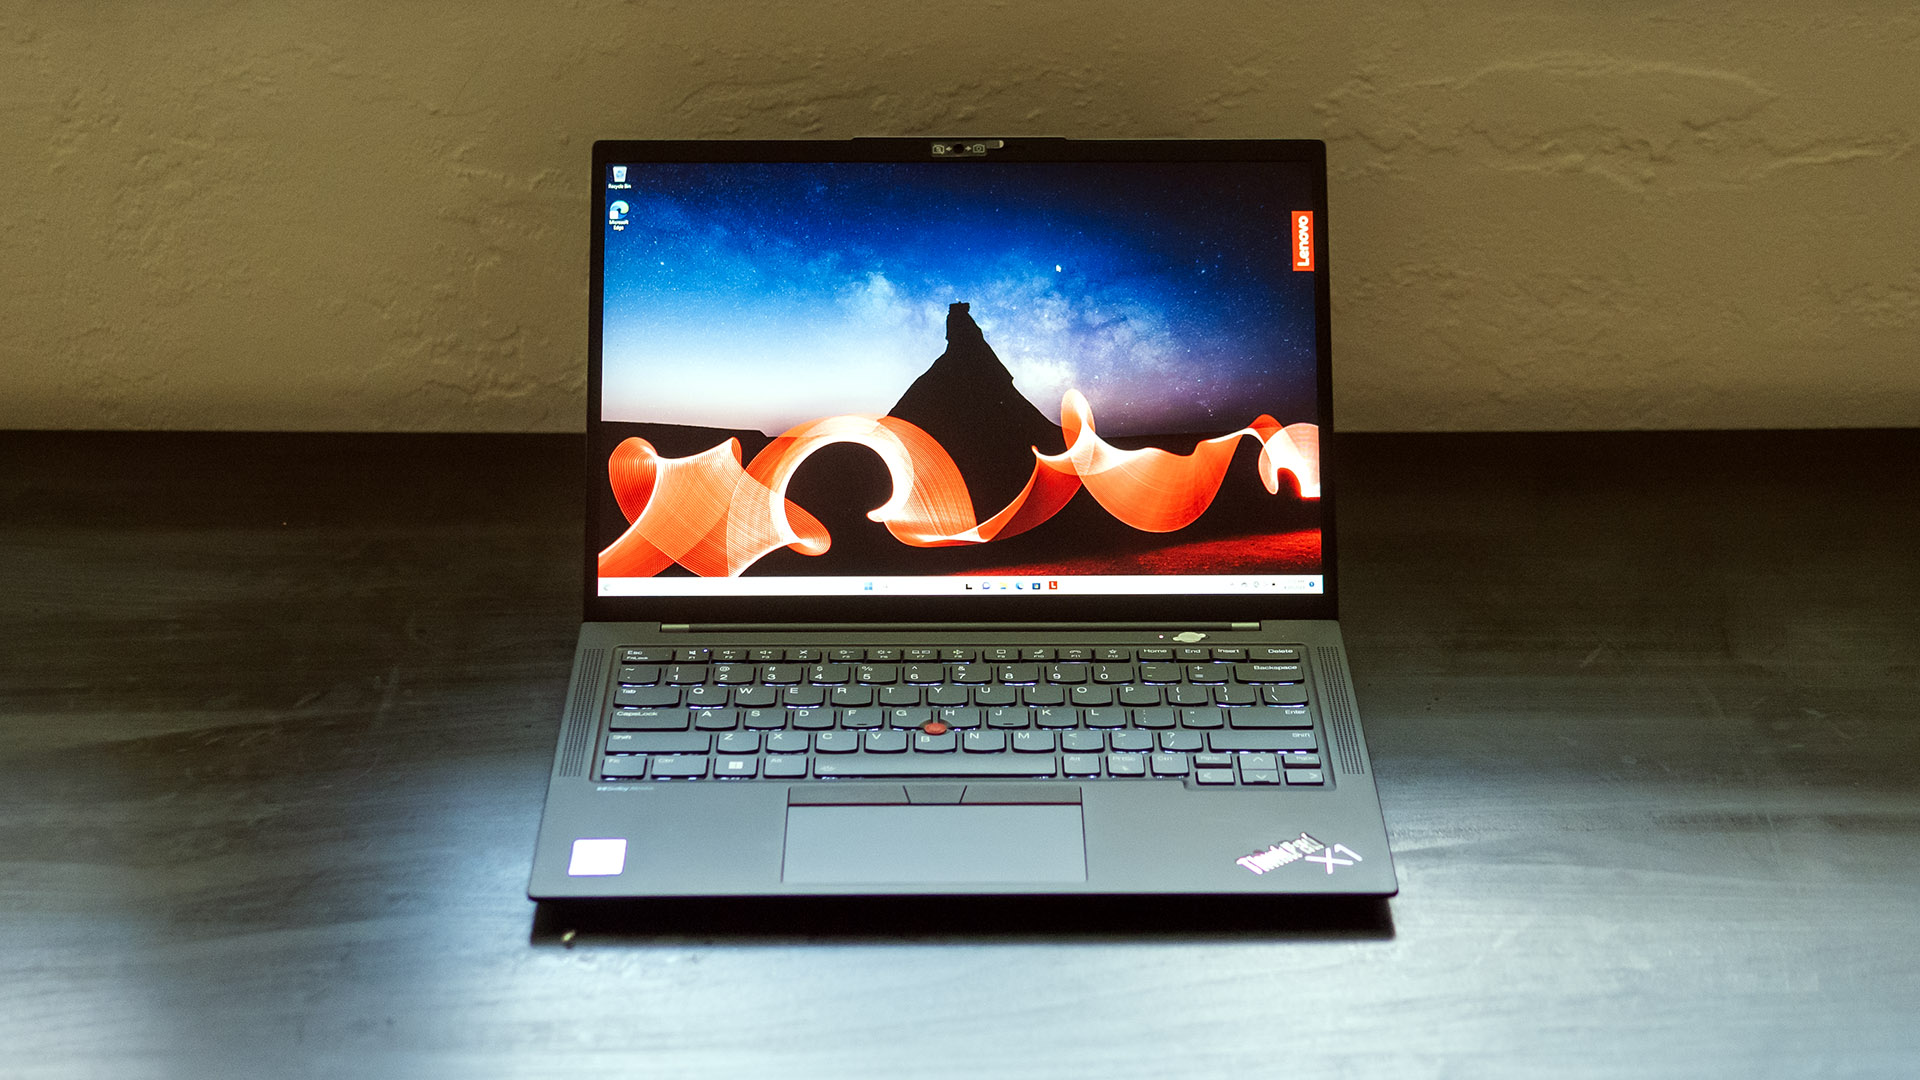 Lenovo Thinkpad T16 Gen 1 review: A big-screened workstation for pros